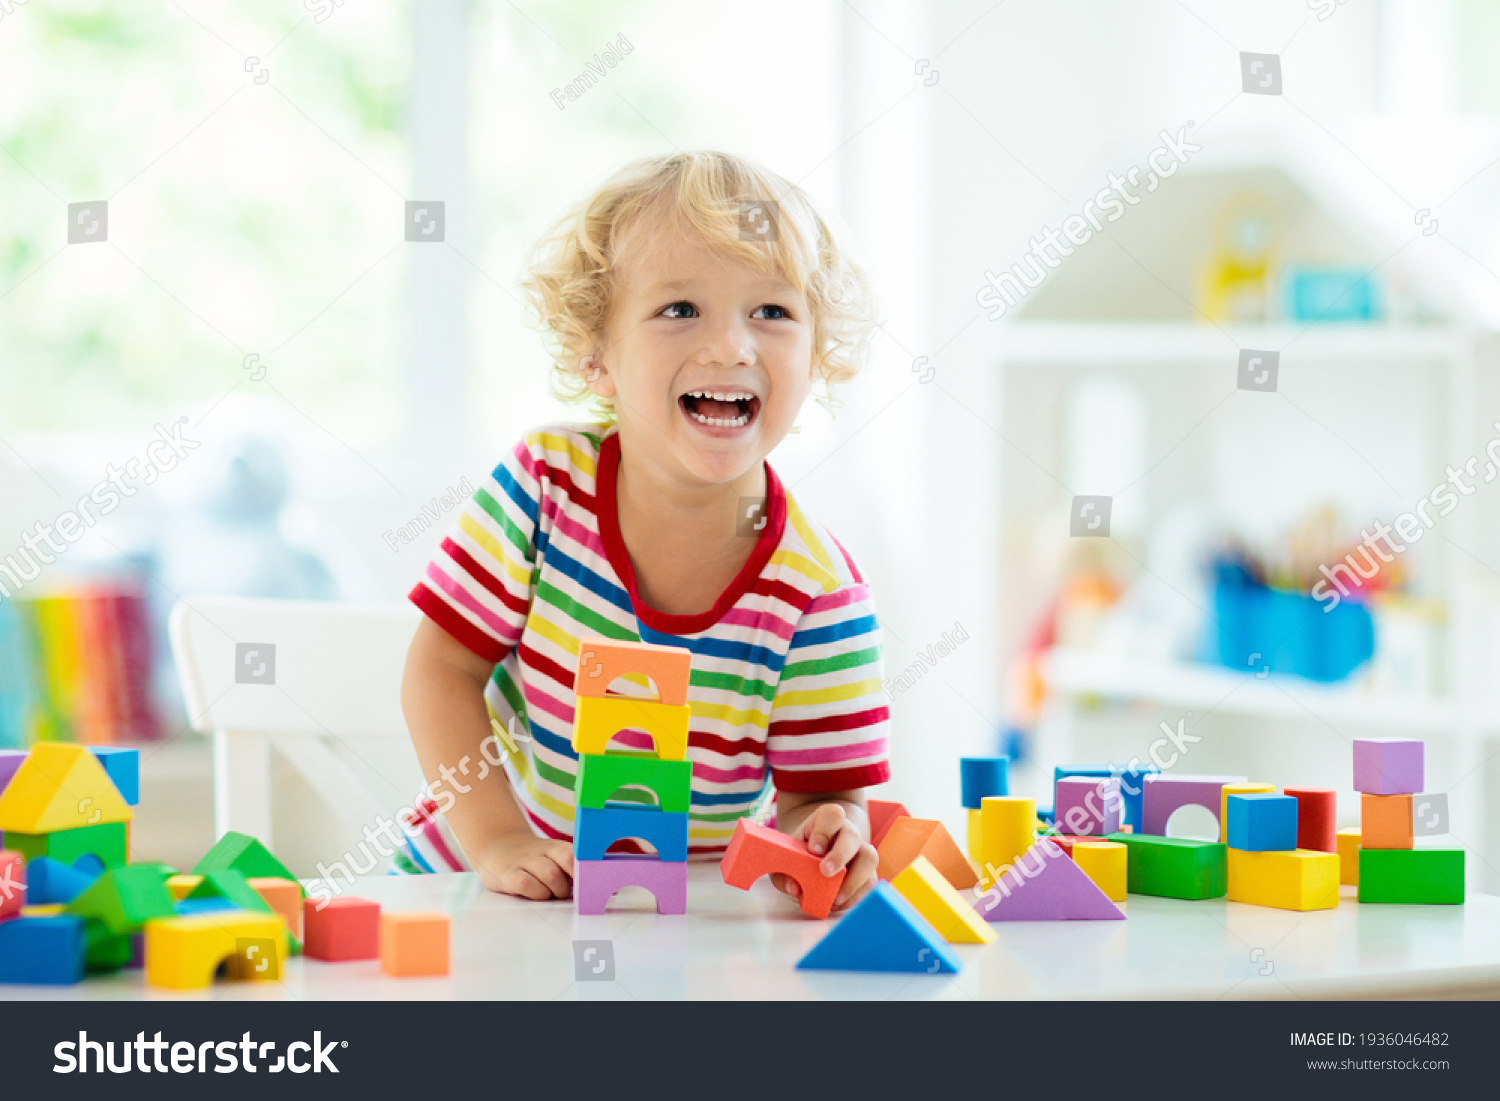 Kid playing with colorful toy blocks. Little boy building tower of block toys. Educational and creative toys and games for young children. Baby in white bedroom with rainbow bricks. Child at home. #1936046482